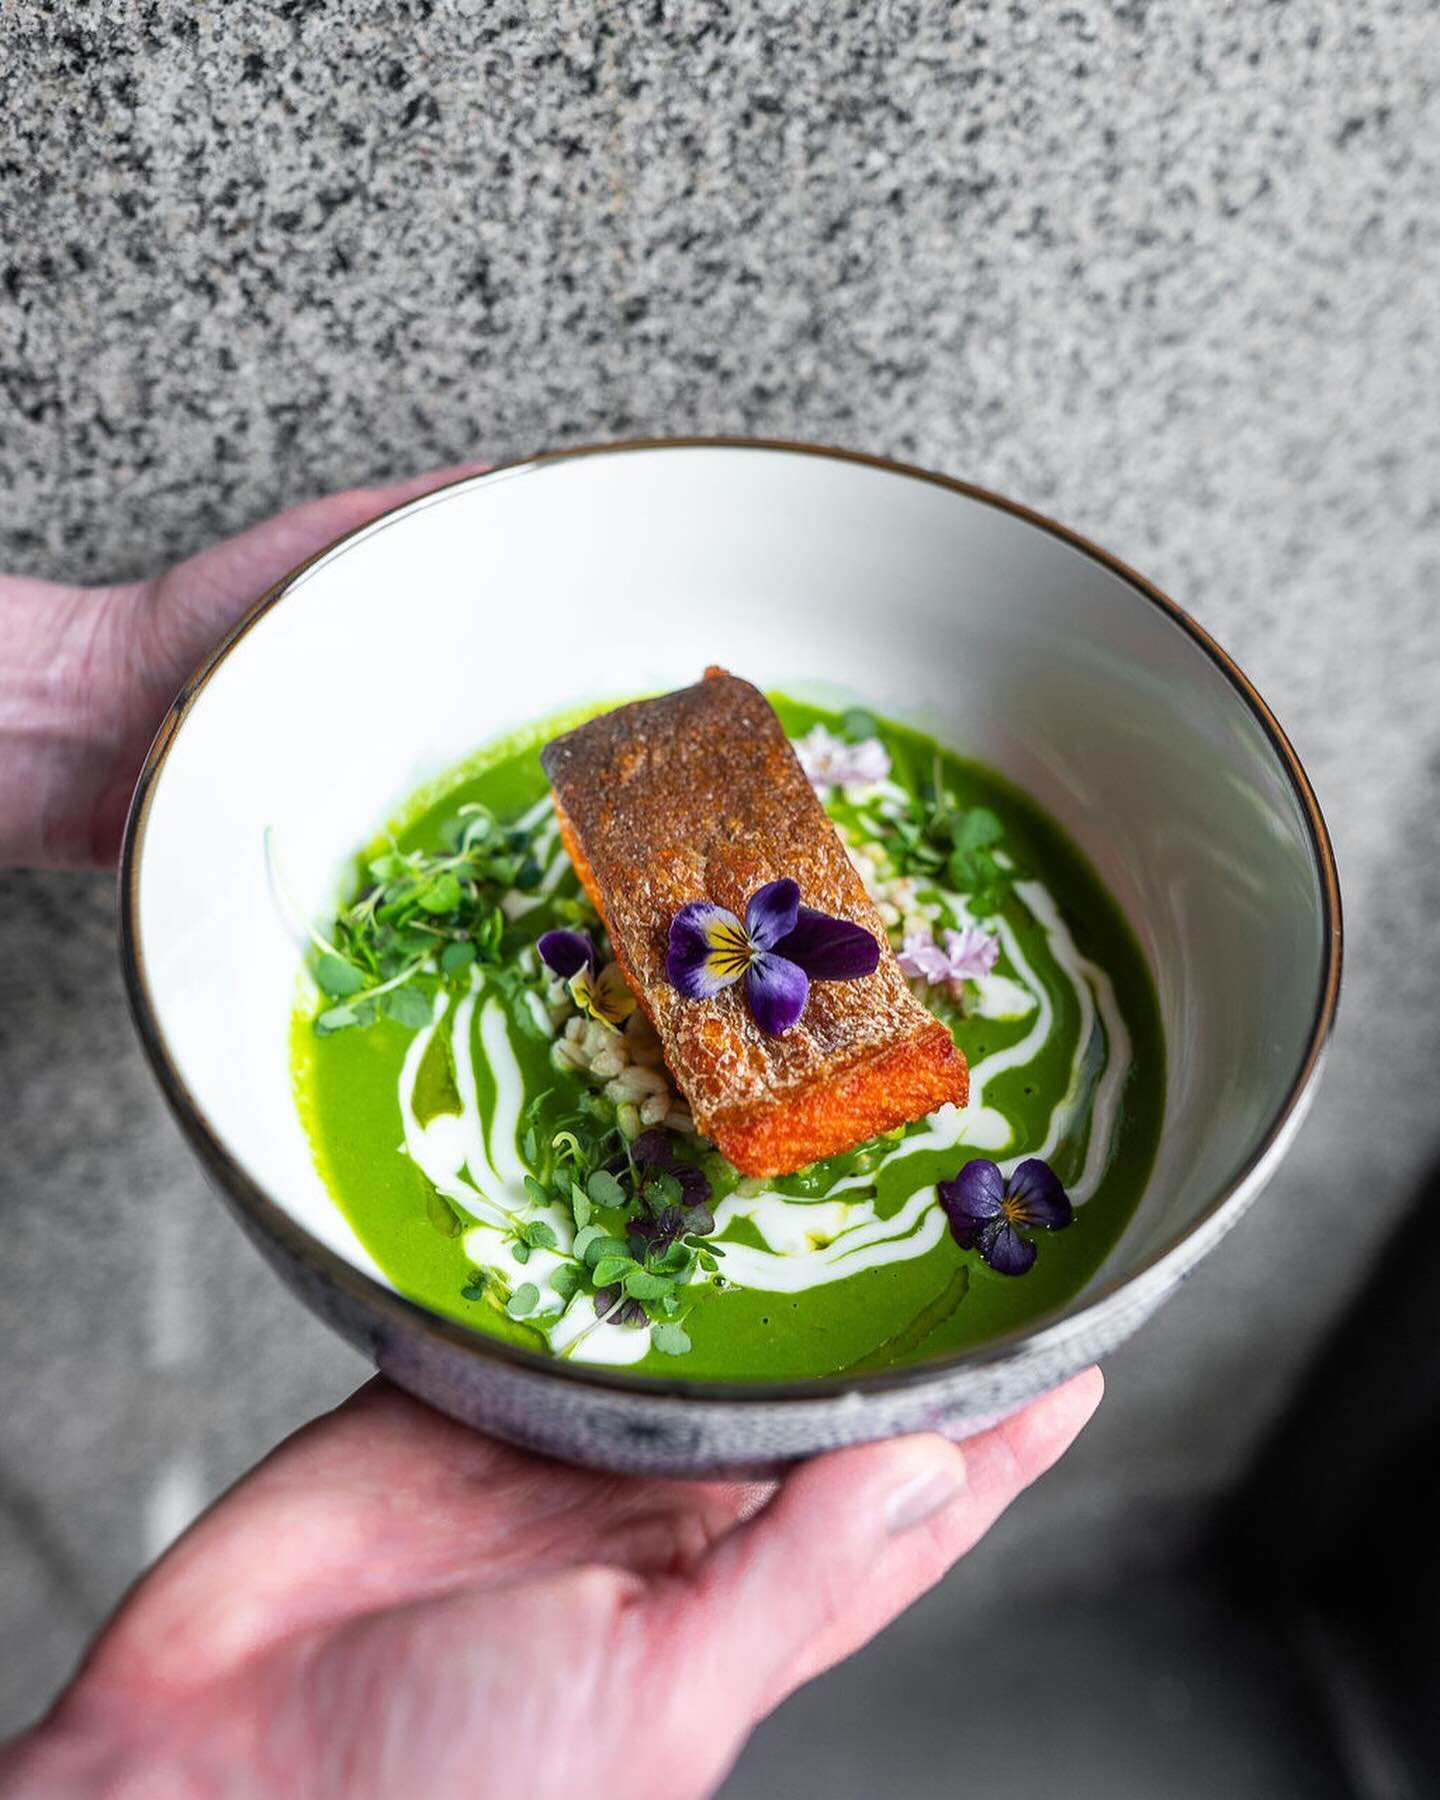 &ldquo;Beauty is in the eye of the beholder&rdquo;

Behold &hellip;Crispy Trout, Grains, Mizuna Pur&eacute;e, Shiso, Ginger Creme Fraiche.  Now available on the Late Spring menu. 

See you at 5 PM.